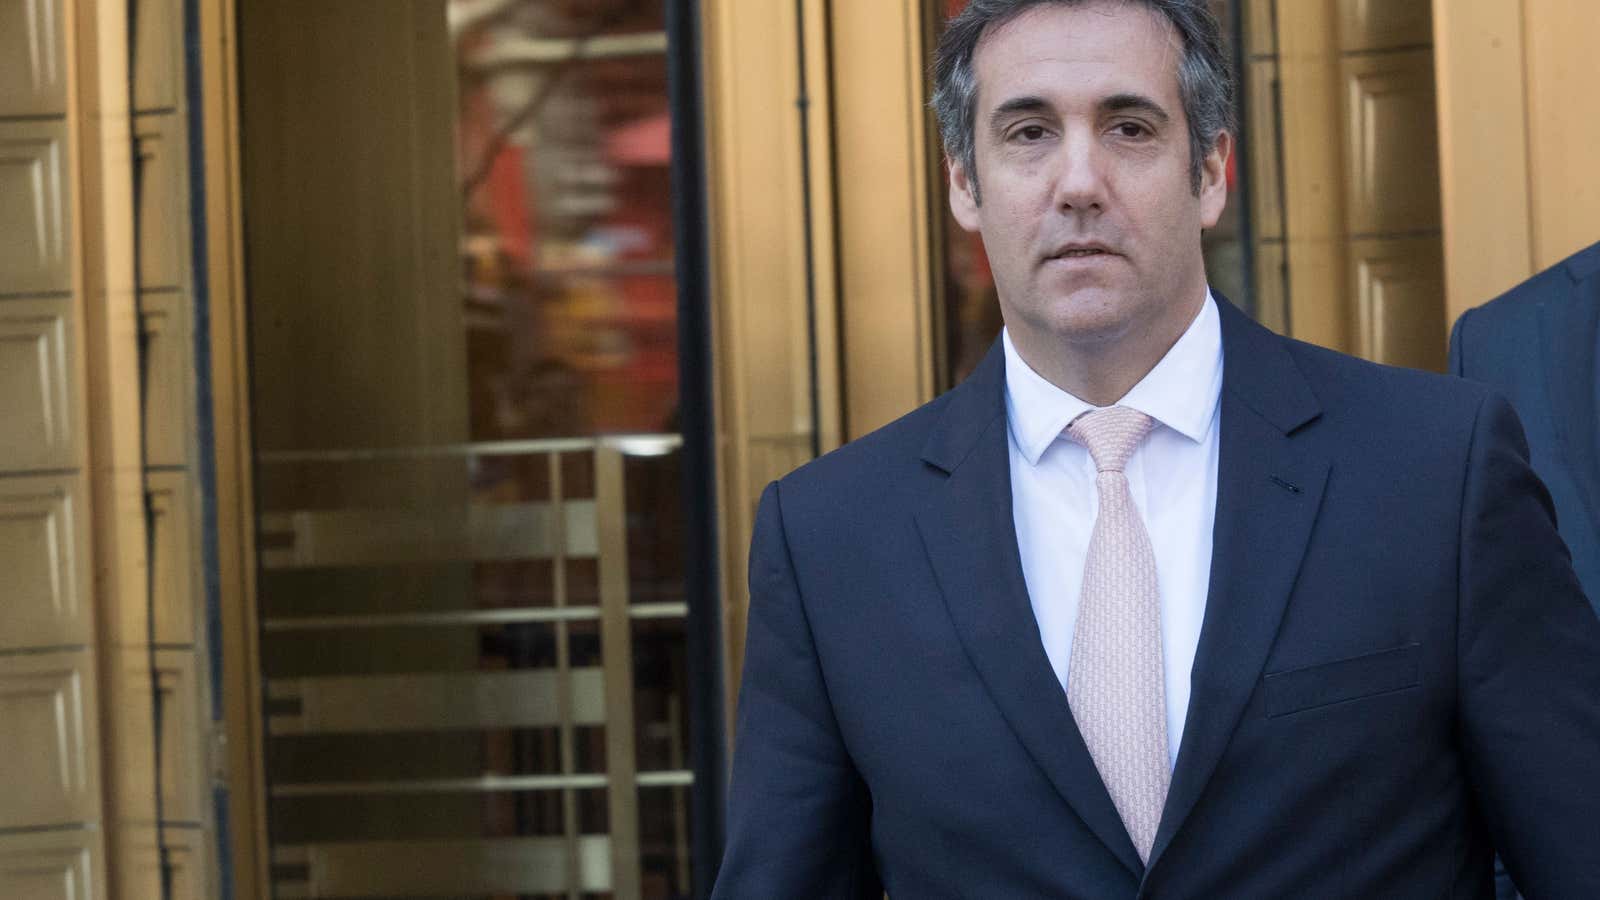 Hiring Cohen was a “serious misjudgment.”